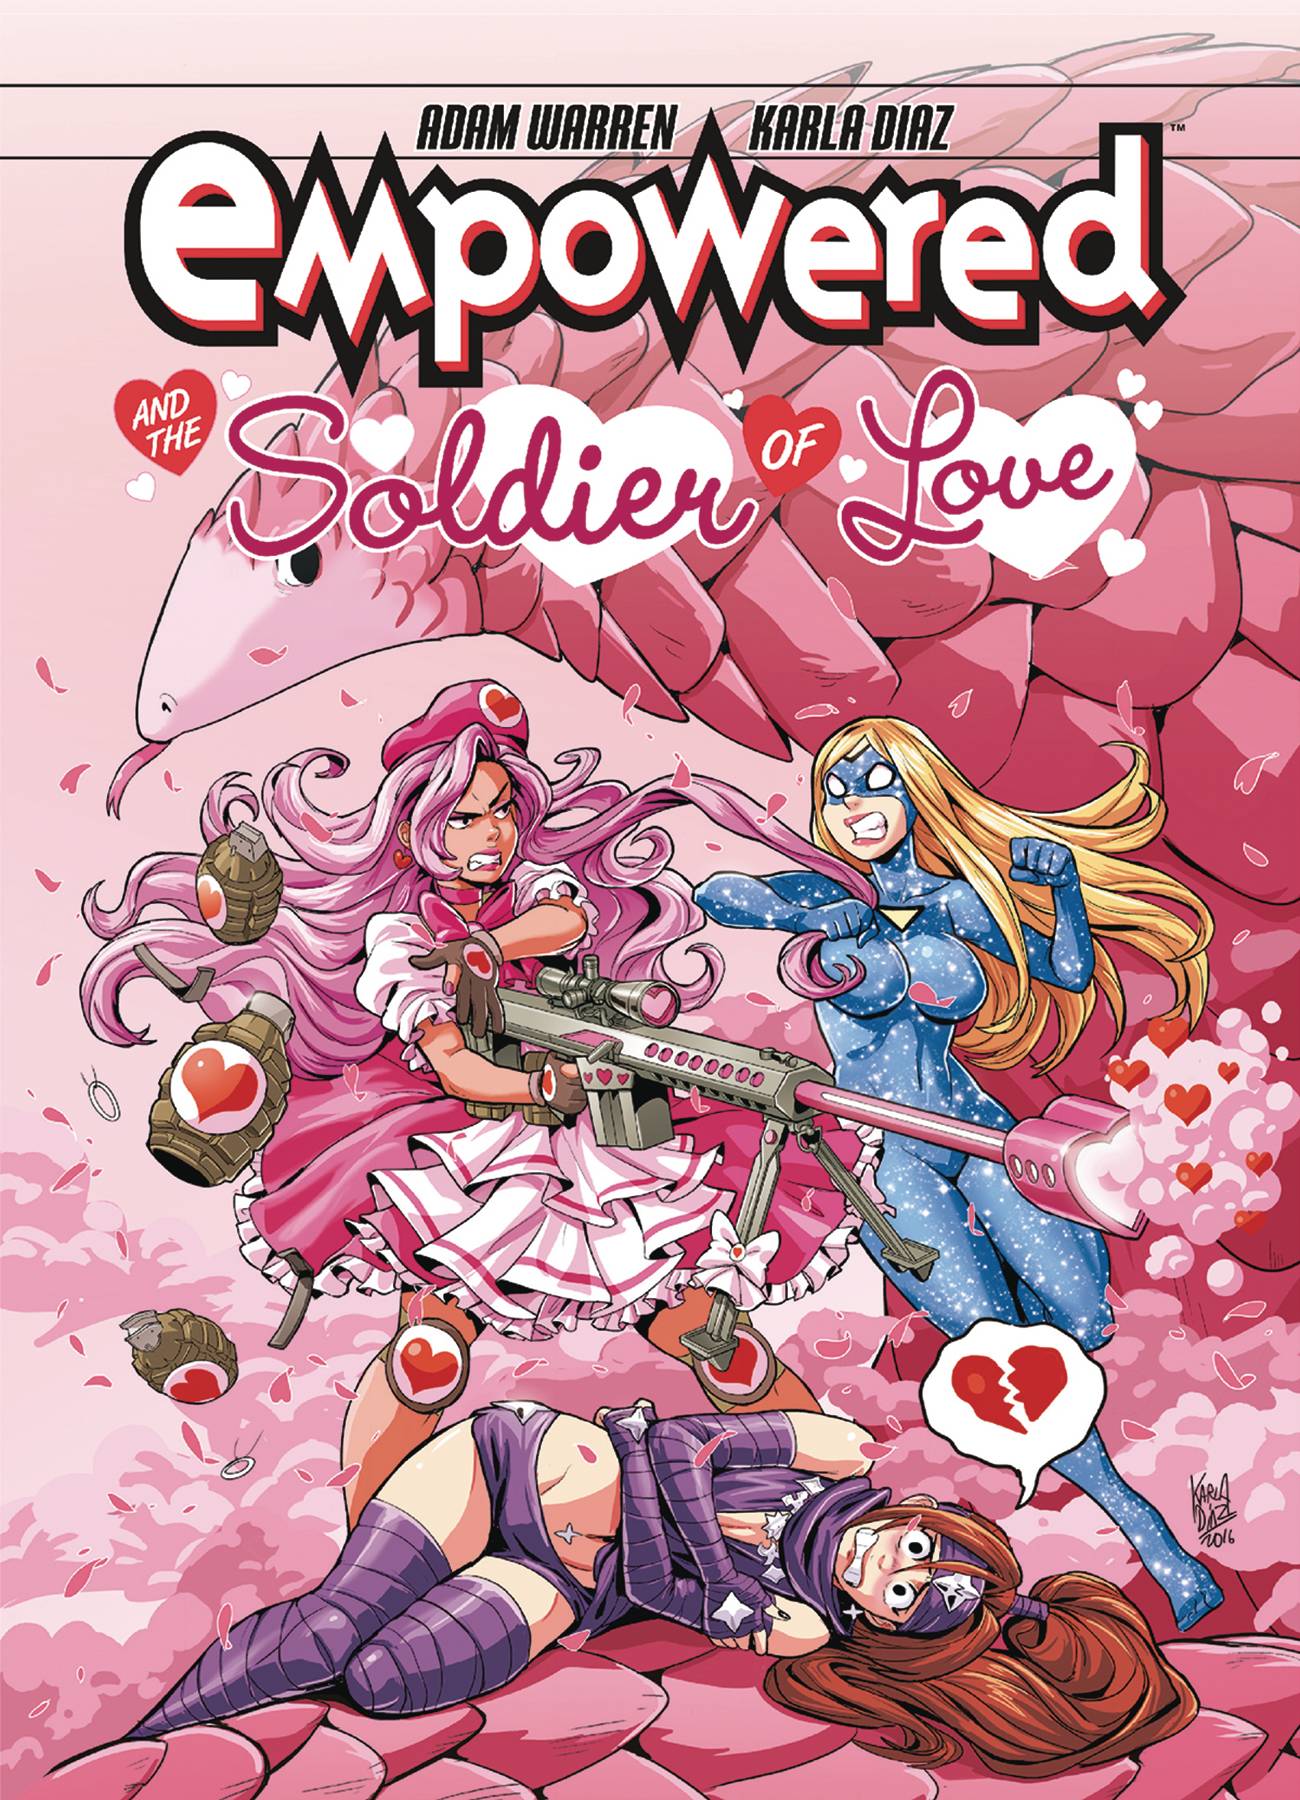 EMPOWERED & SOLDIER OF LOVE TP (FEB180067)